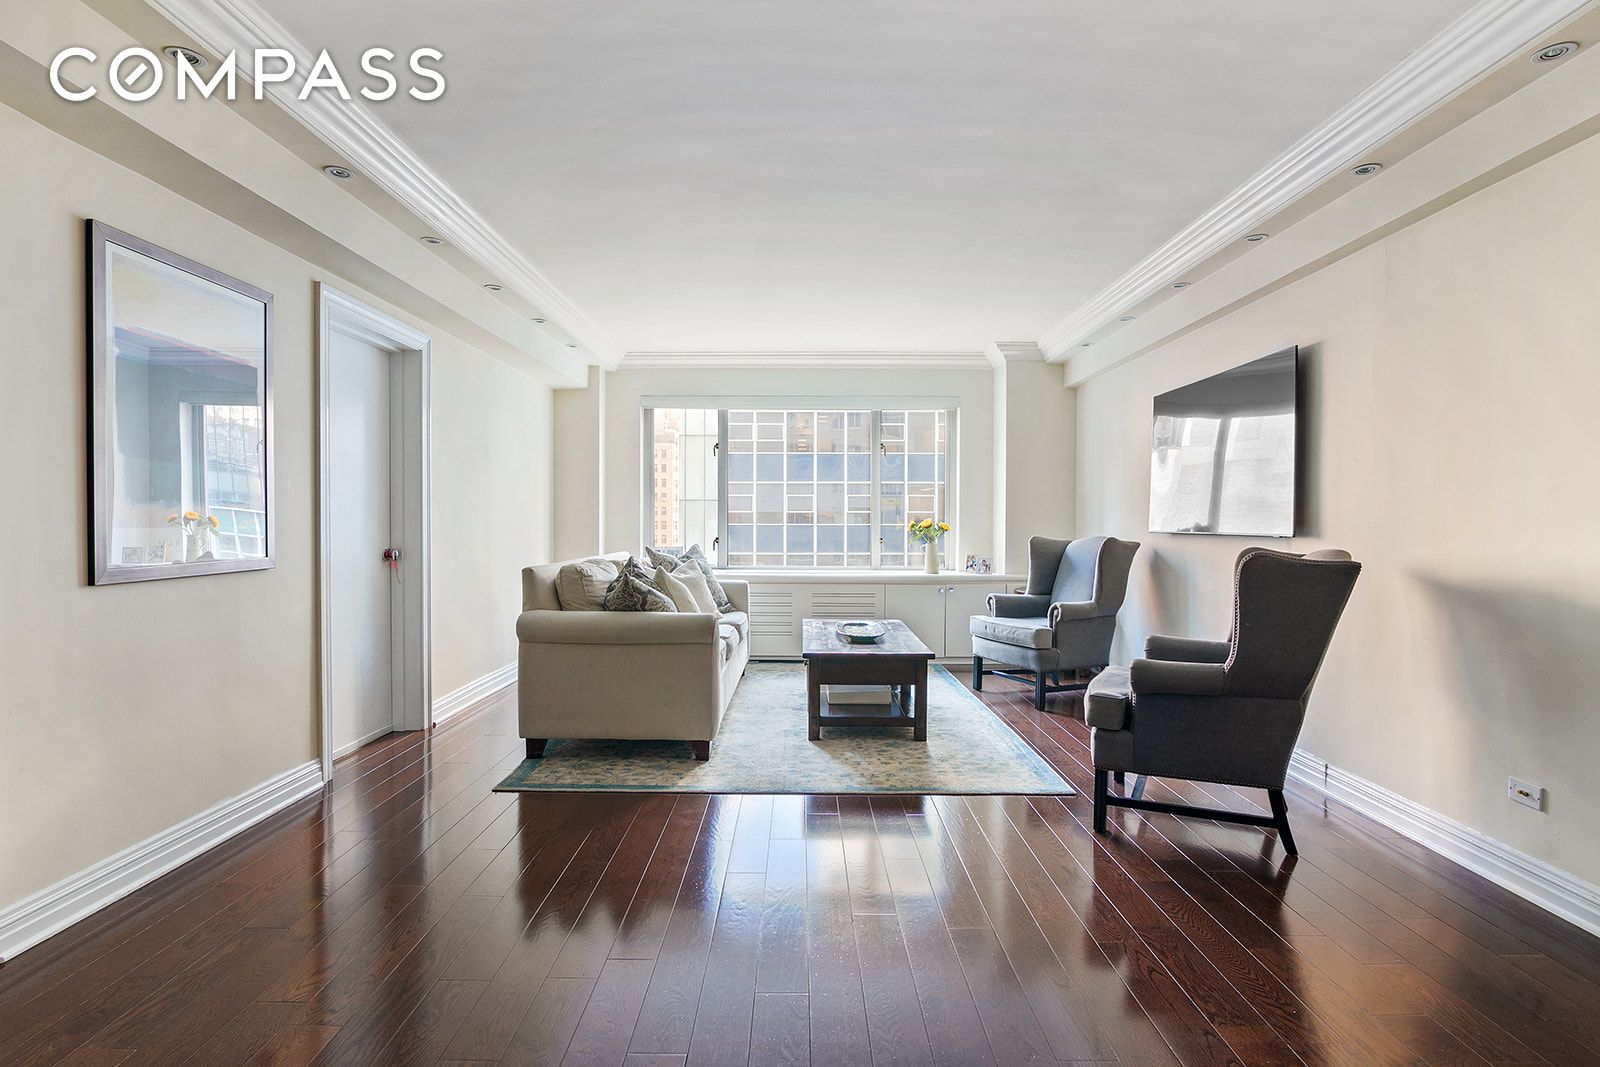 200 East 57th St. in Sutton Place : Sales, Rentals, Floorplans